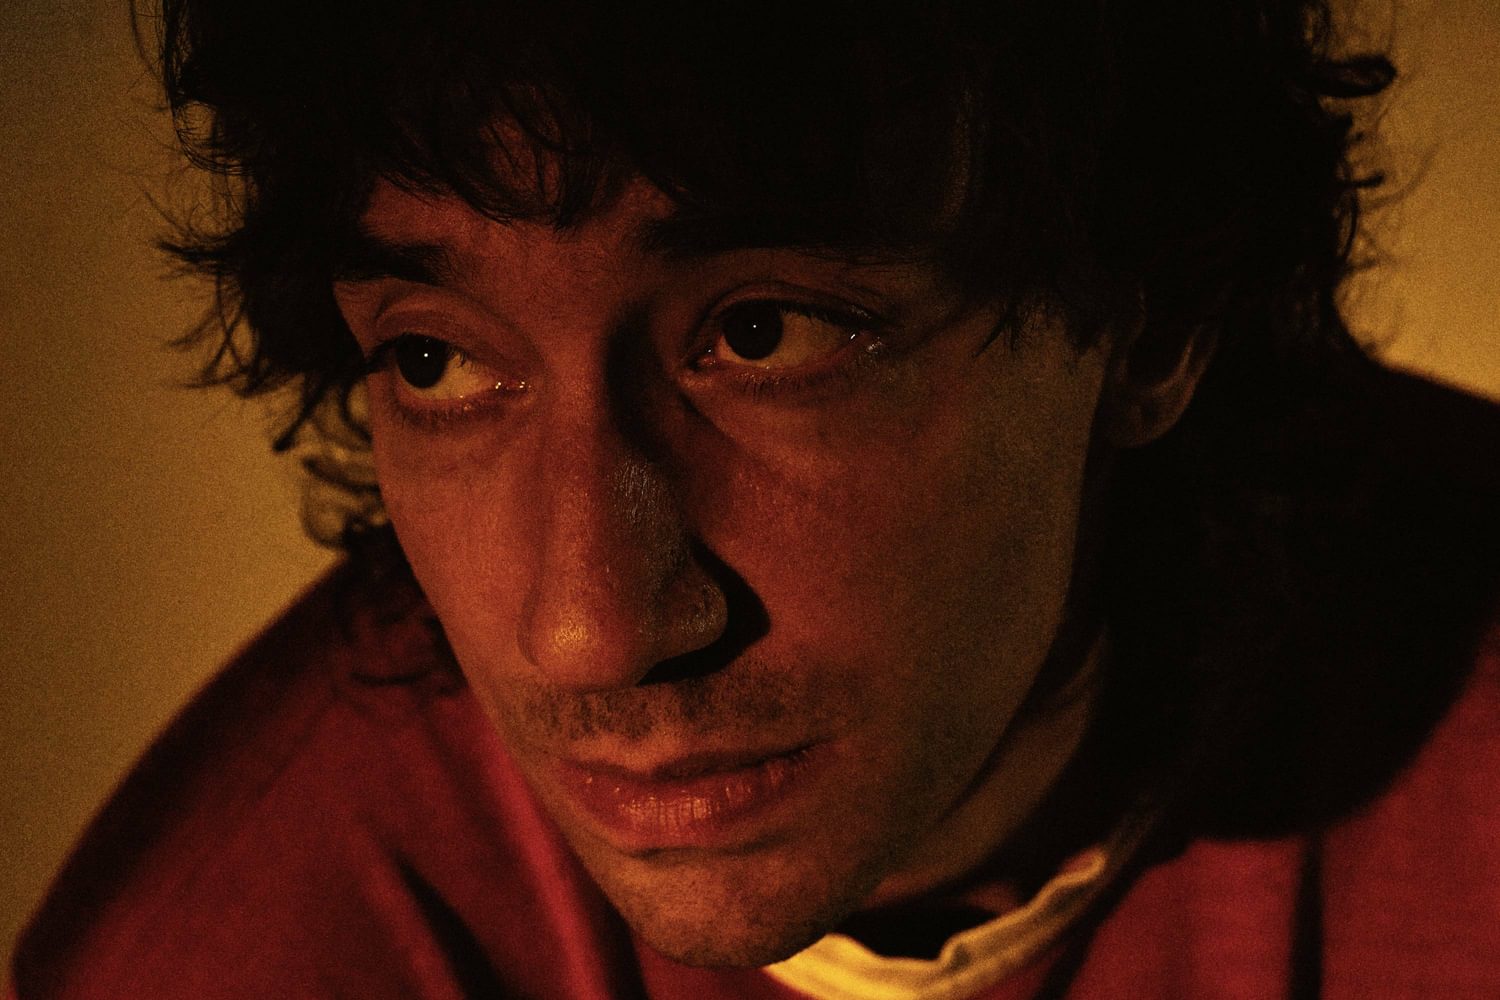 Albert Hammond Jr shares eight new songs and video for ‘Old Man’